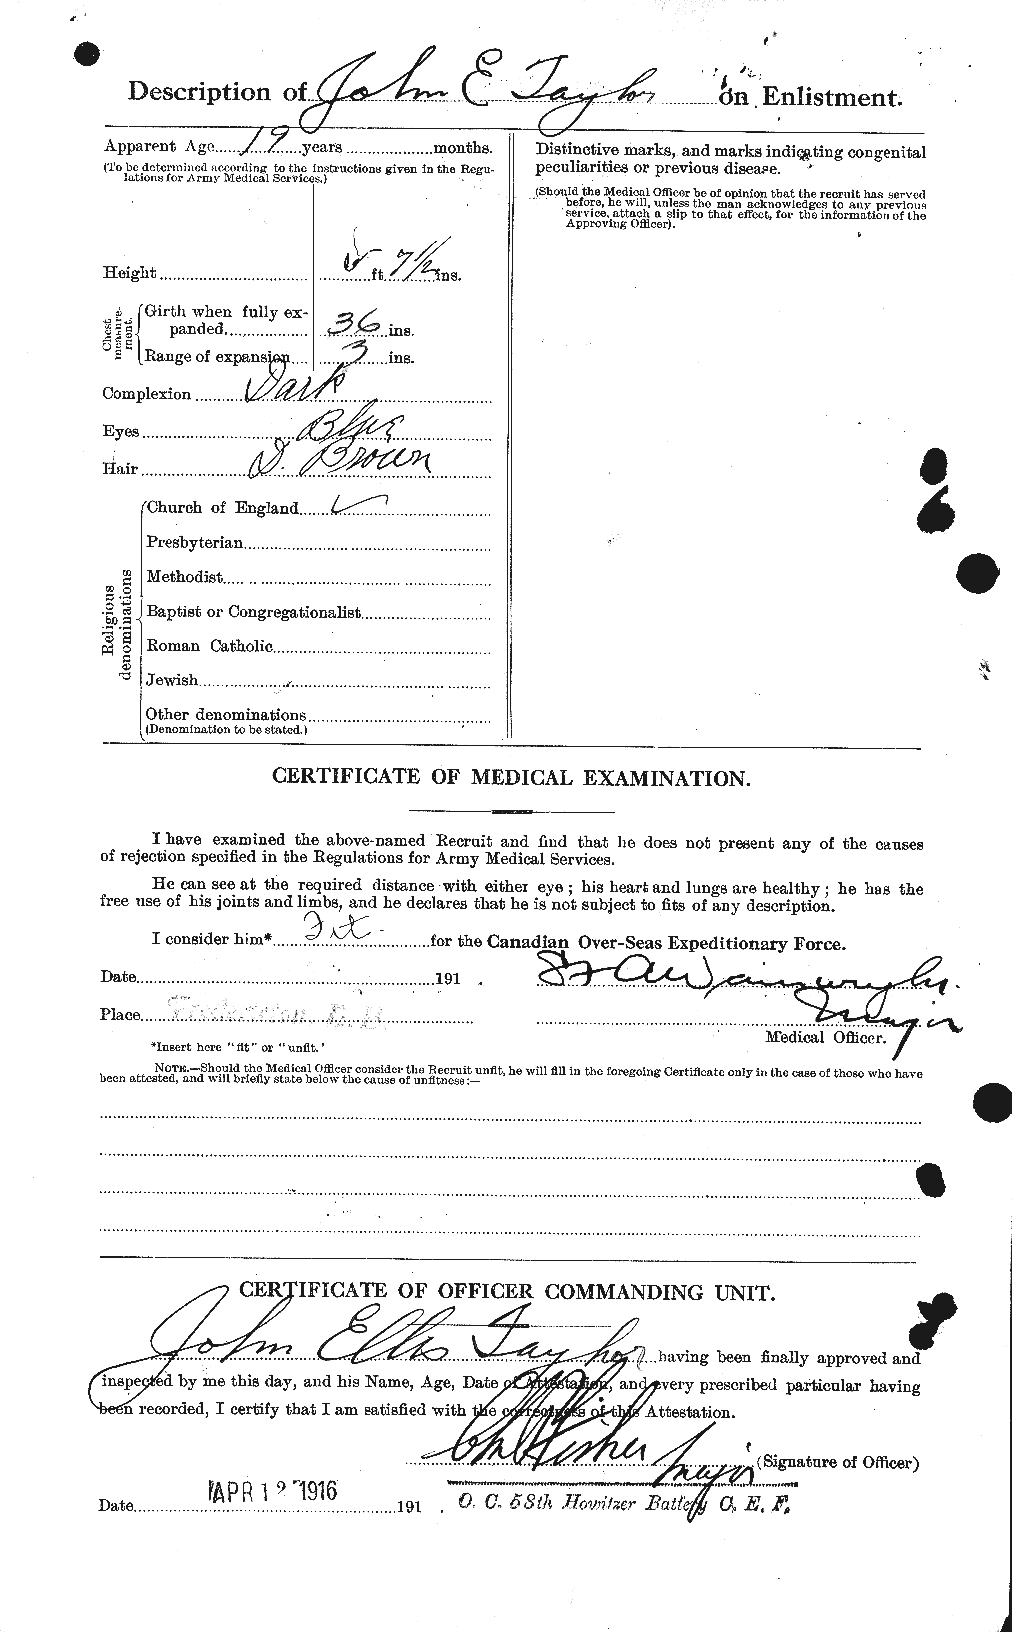 Personnel Records of the First World War - CEF 627084b